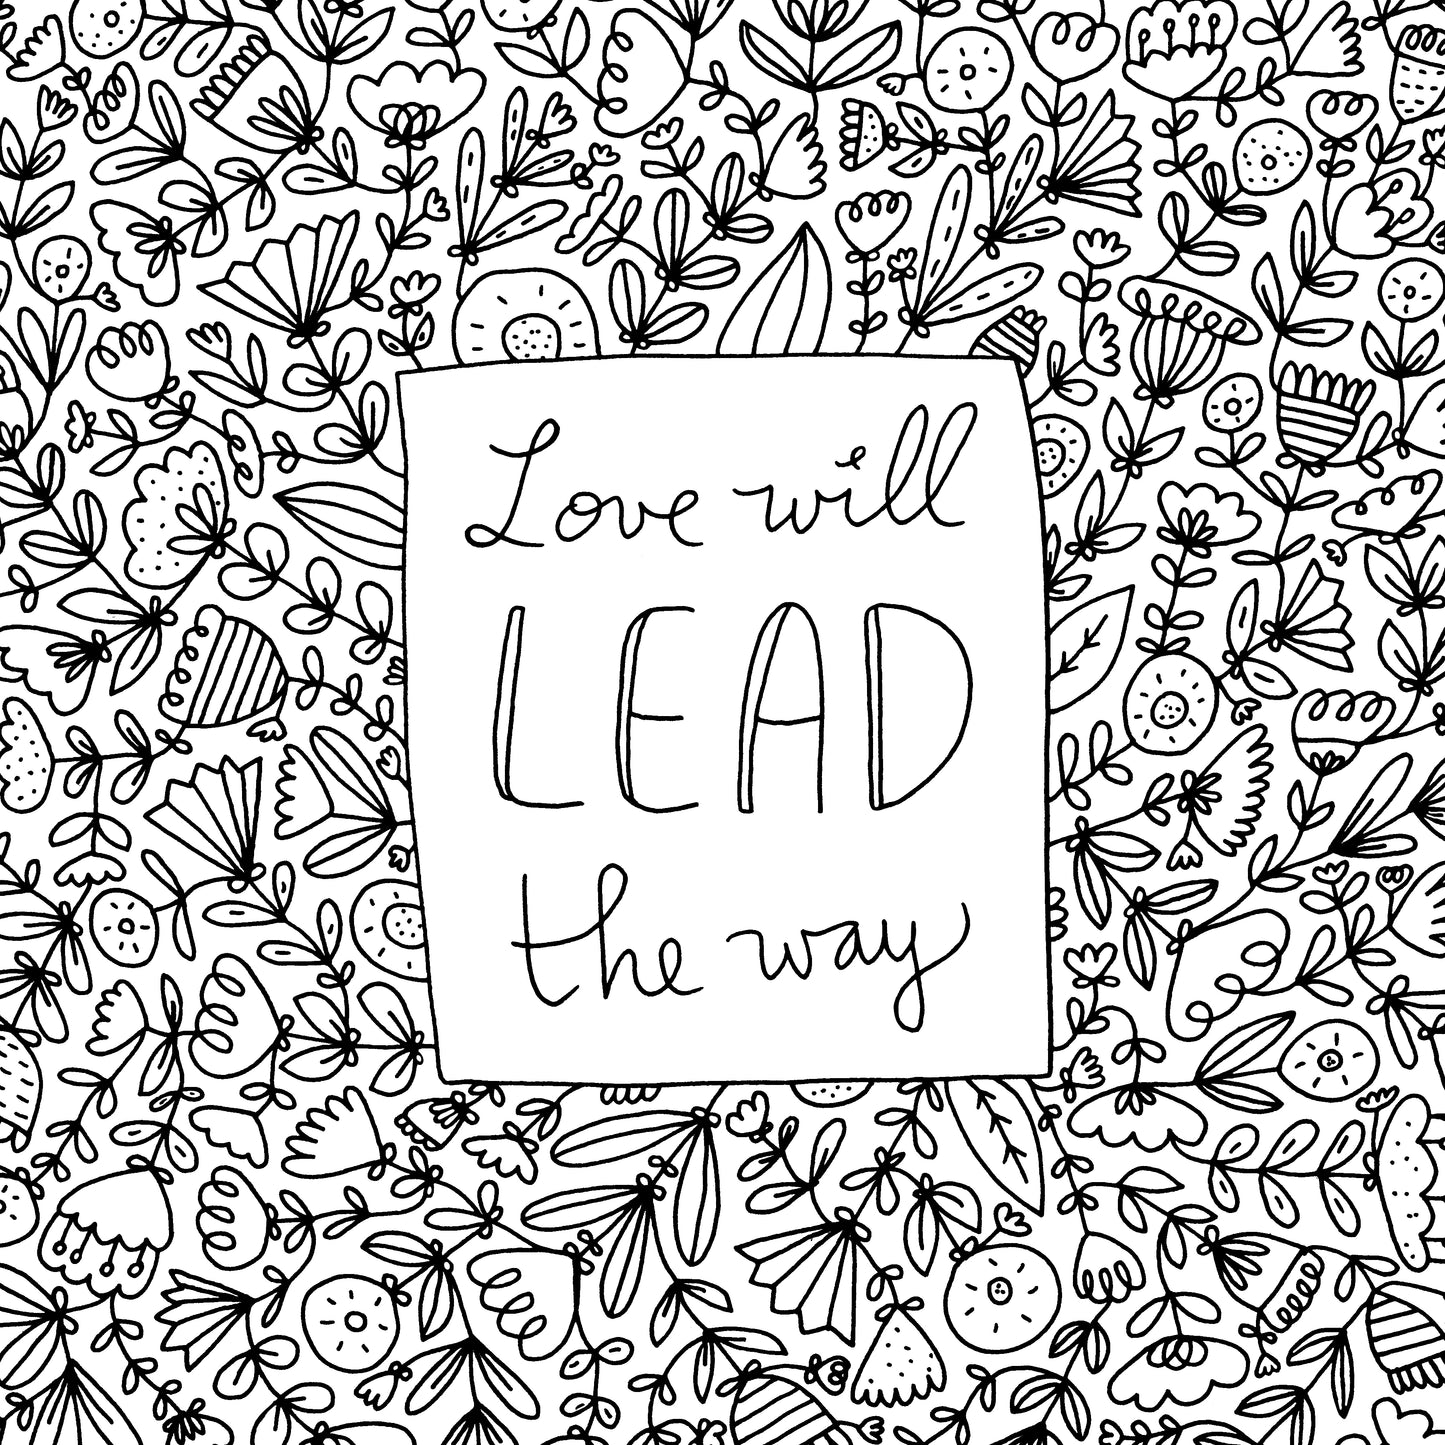 Love Will Lead the Way